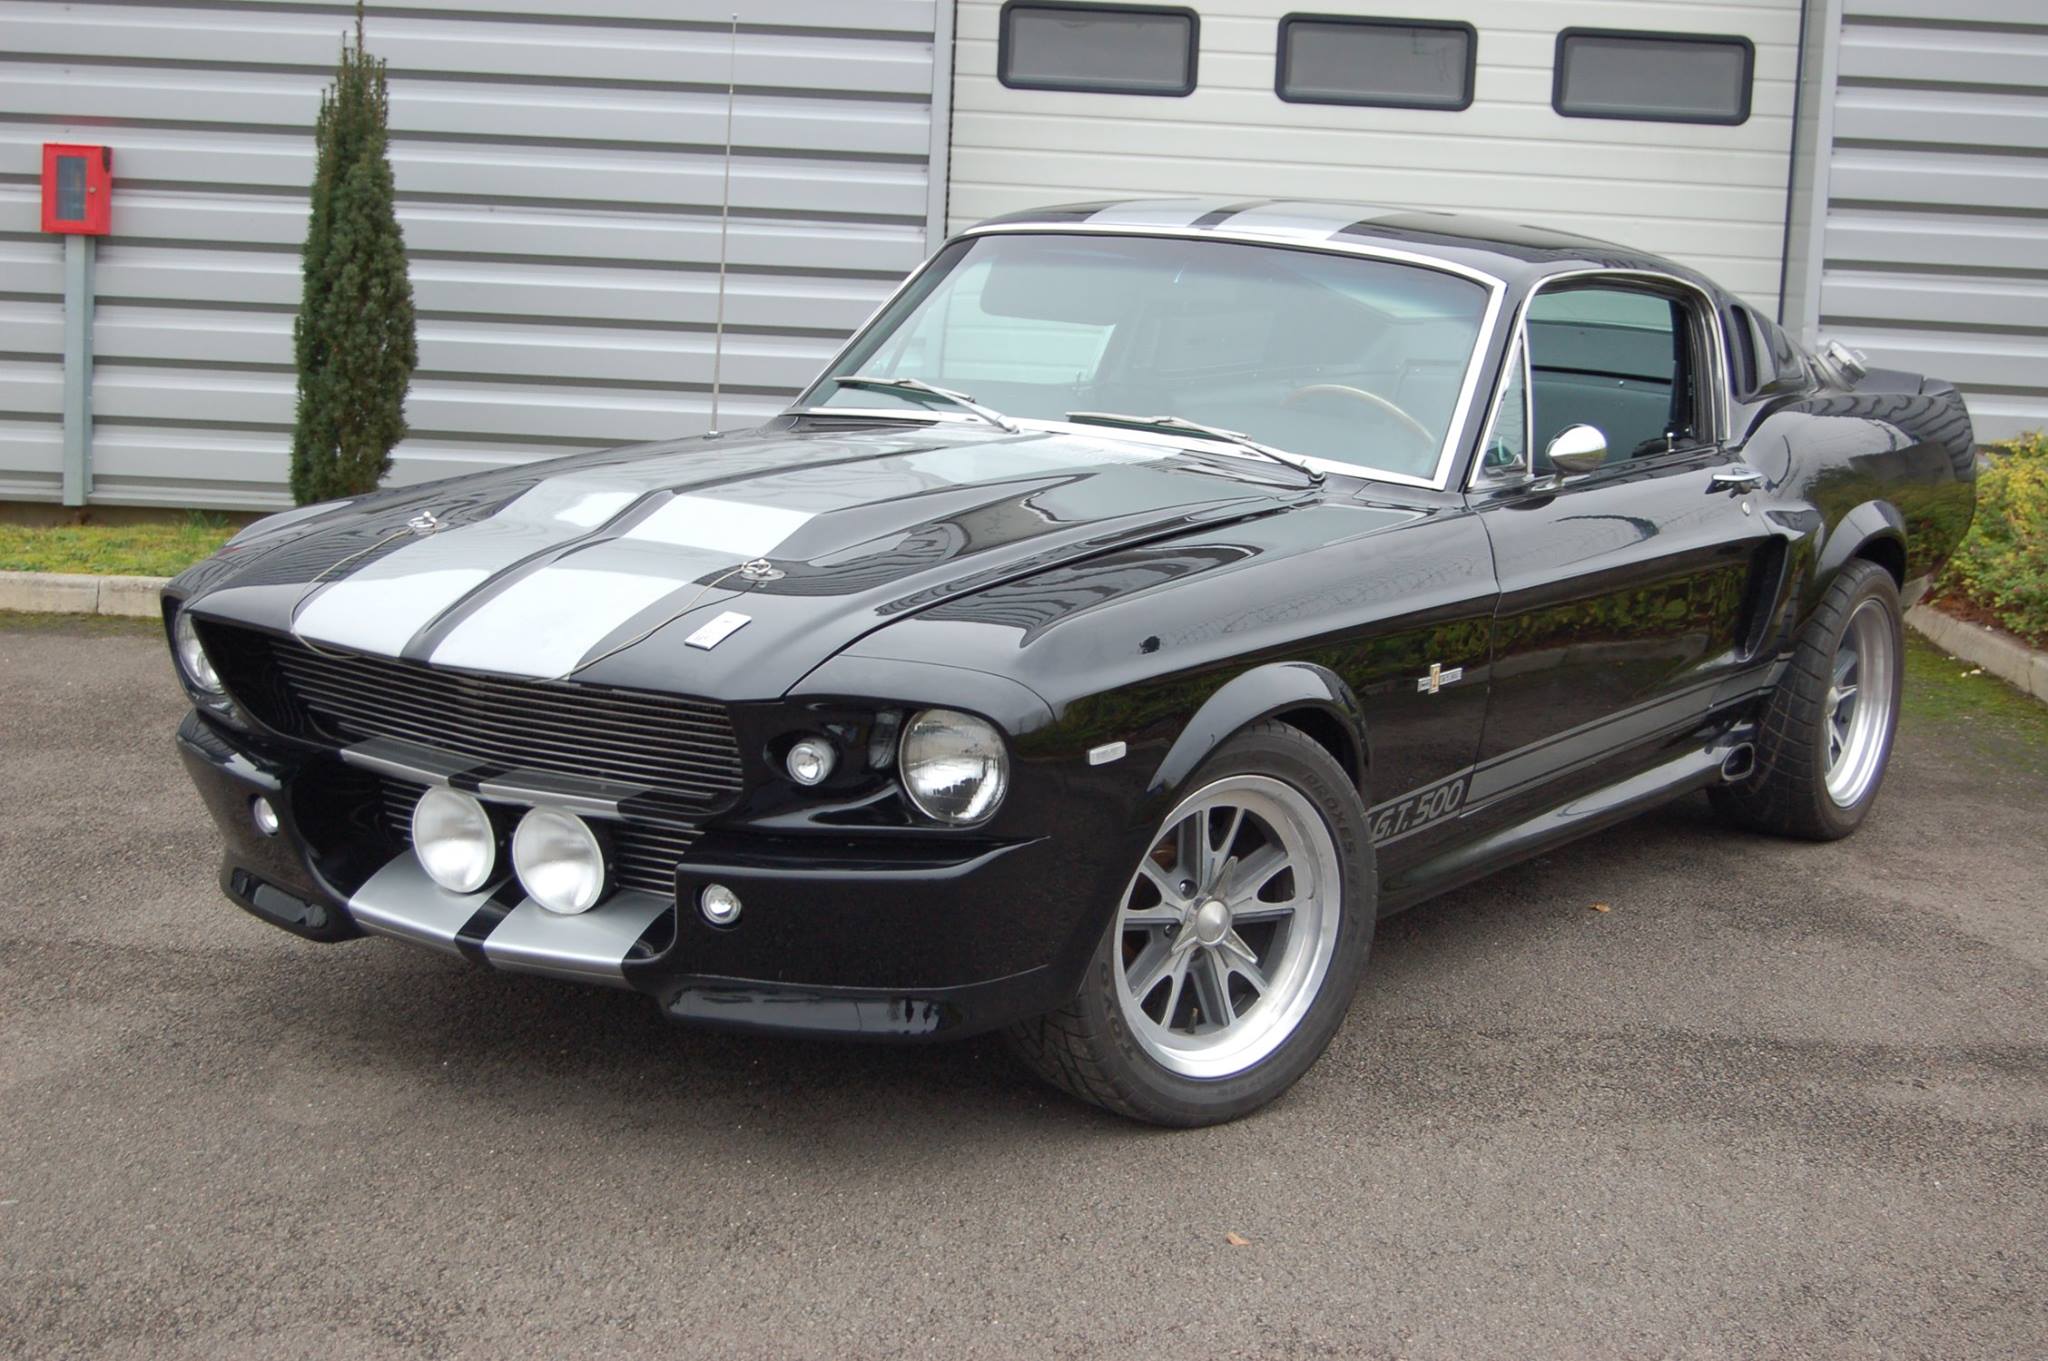 67 Ford Mustang Fastback Eleanor - Ford Mustang 2019